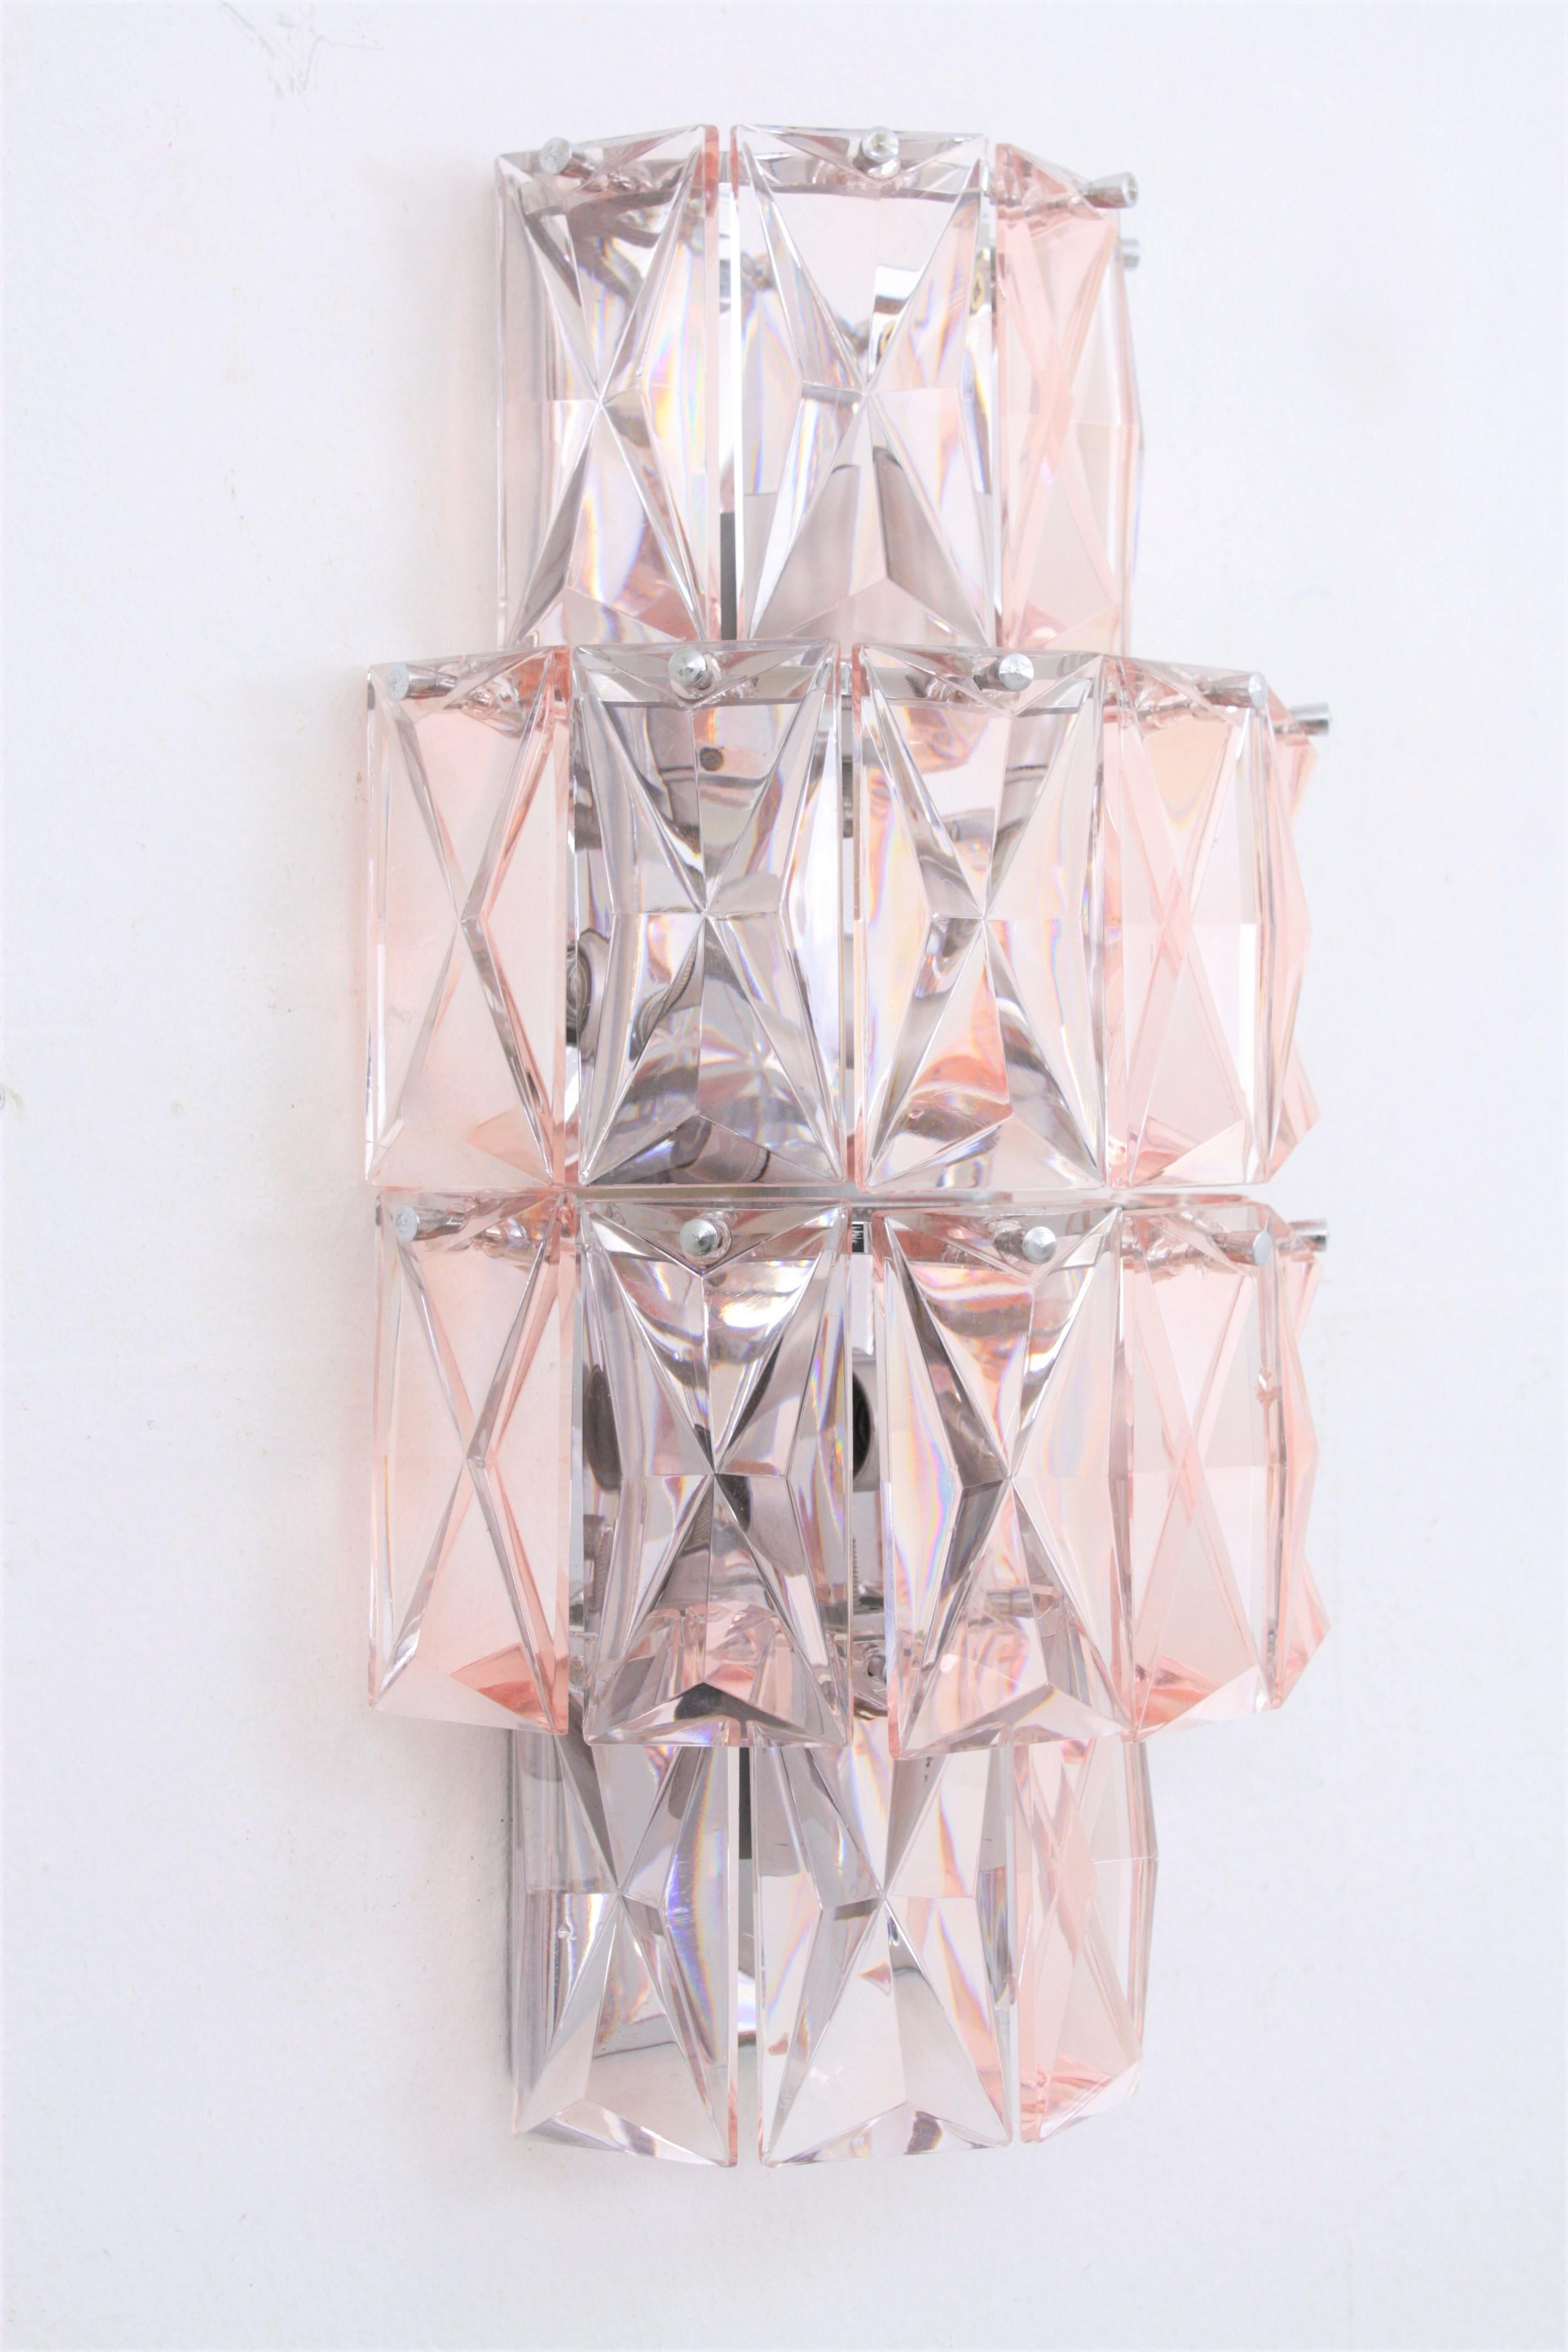 Polished Baccarat Pink Crystal Wall Sconce, Mid-Century Modern Period For Sale